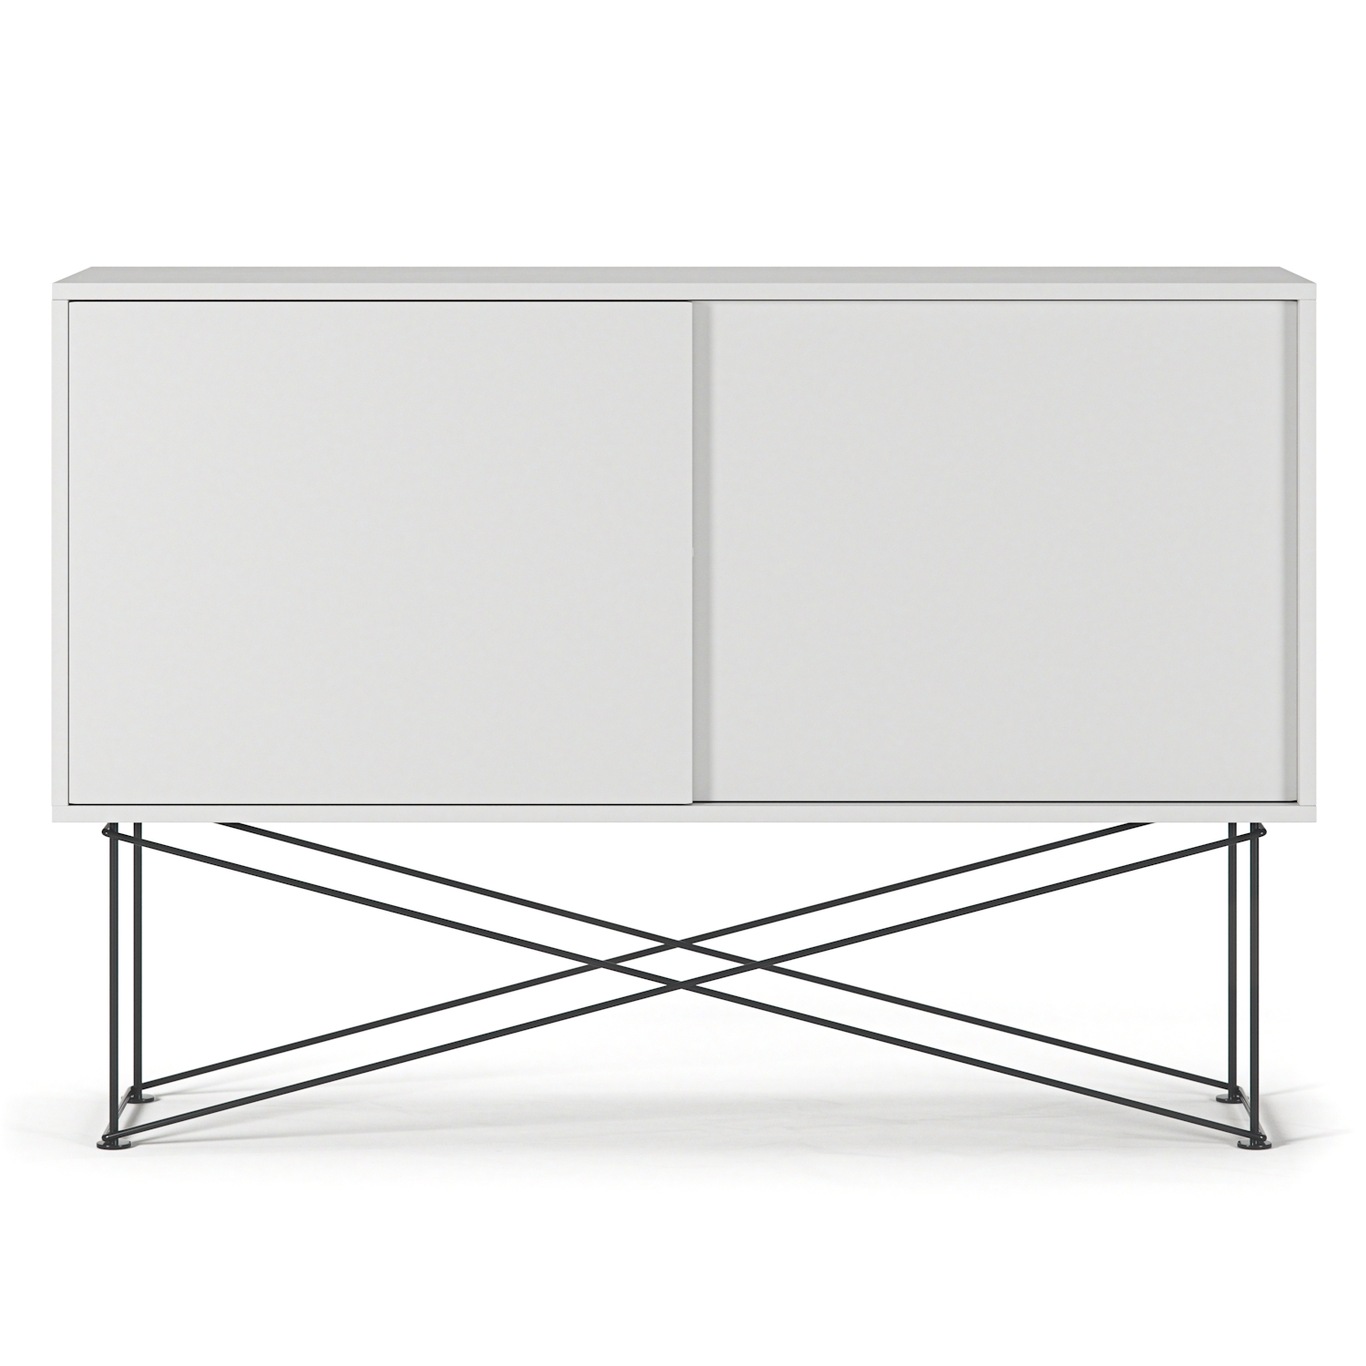 Vogue Sideboard With Stand 136 cm, White / Black